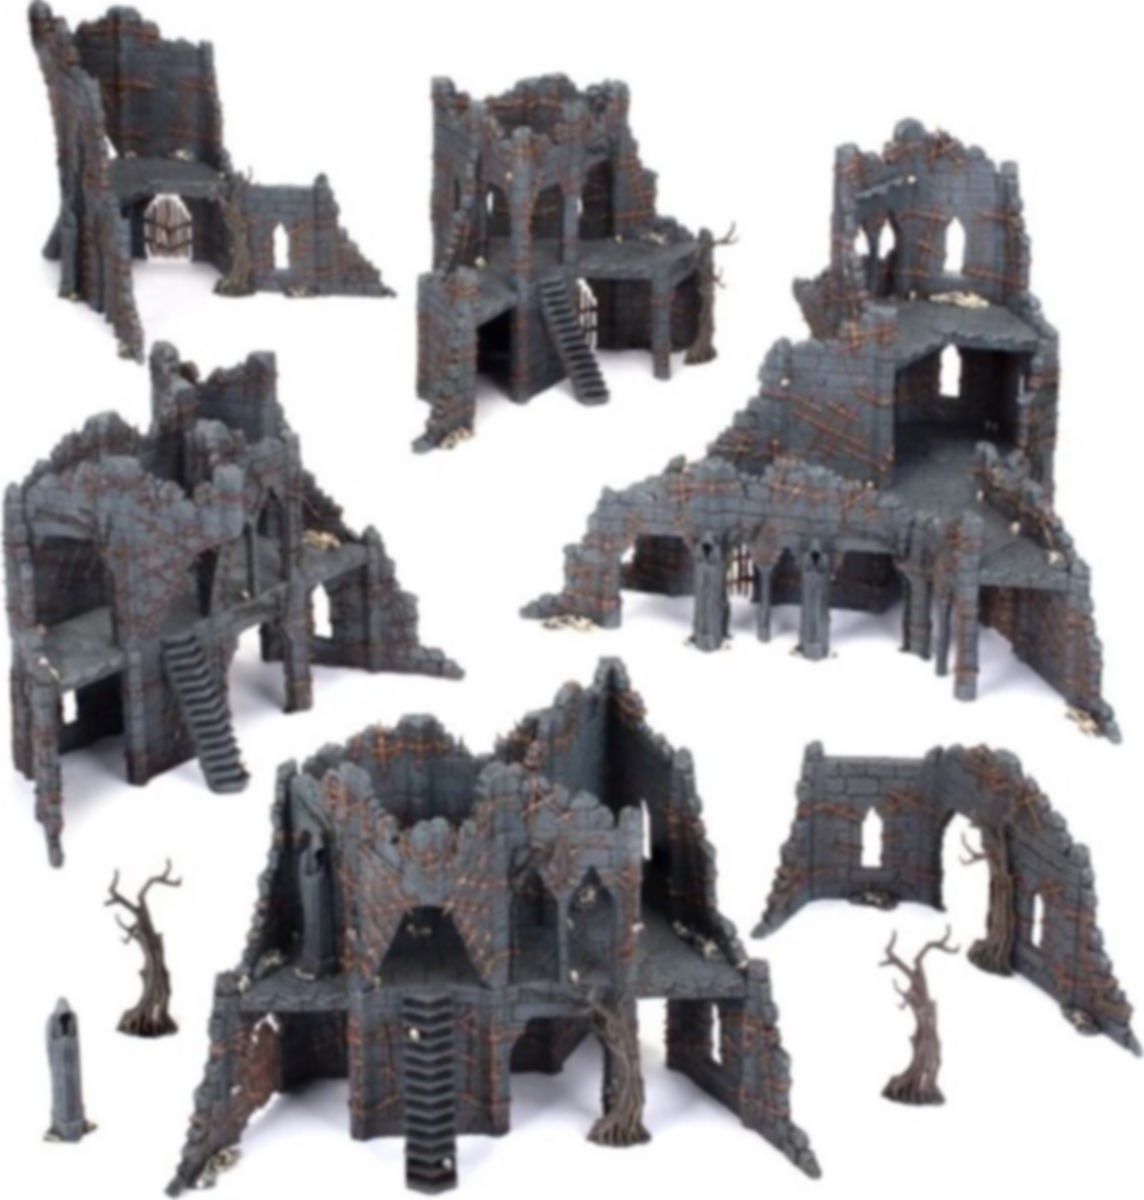 Middle-earth Strategy Battle Game: The Hobbit - Fortress of Dol Guldur components